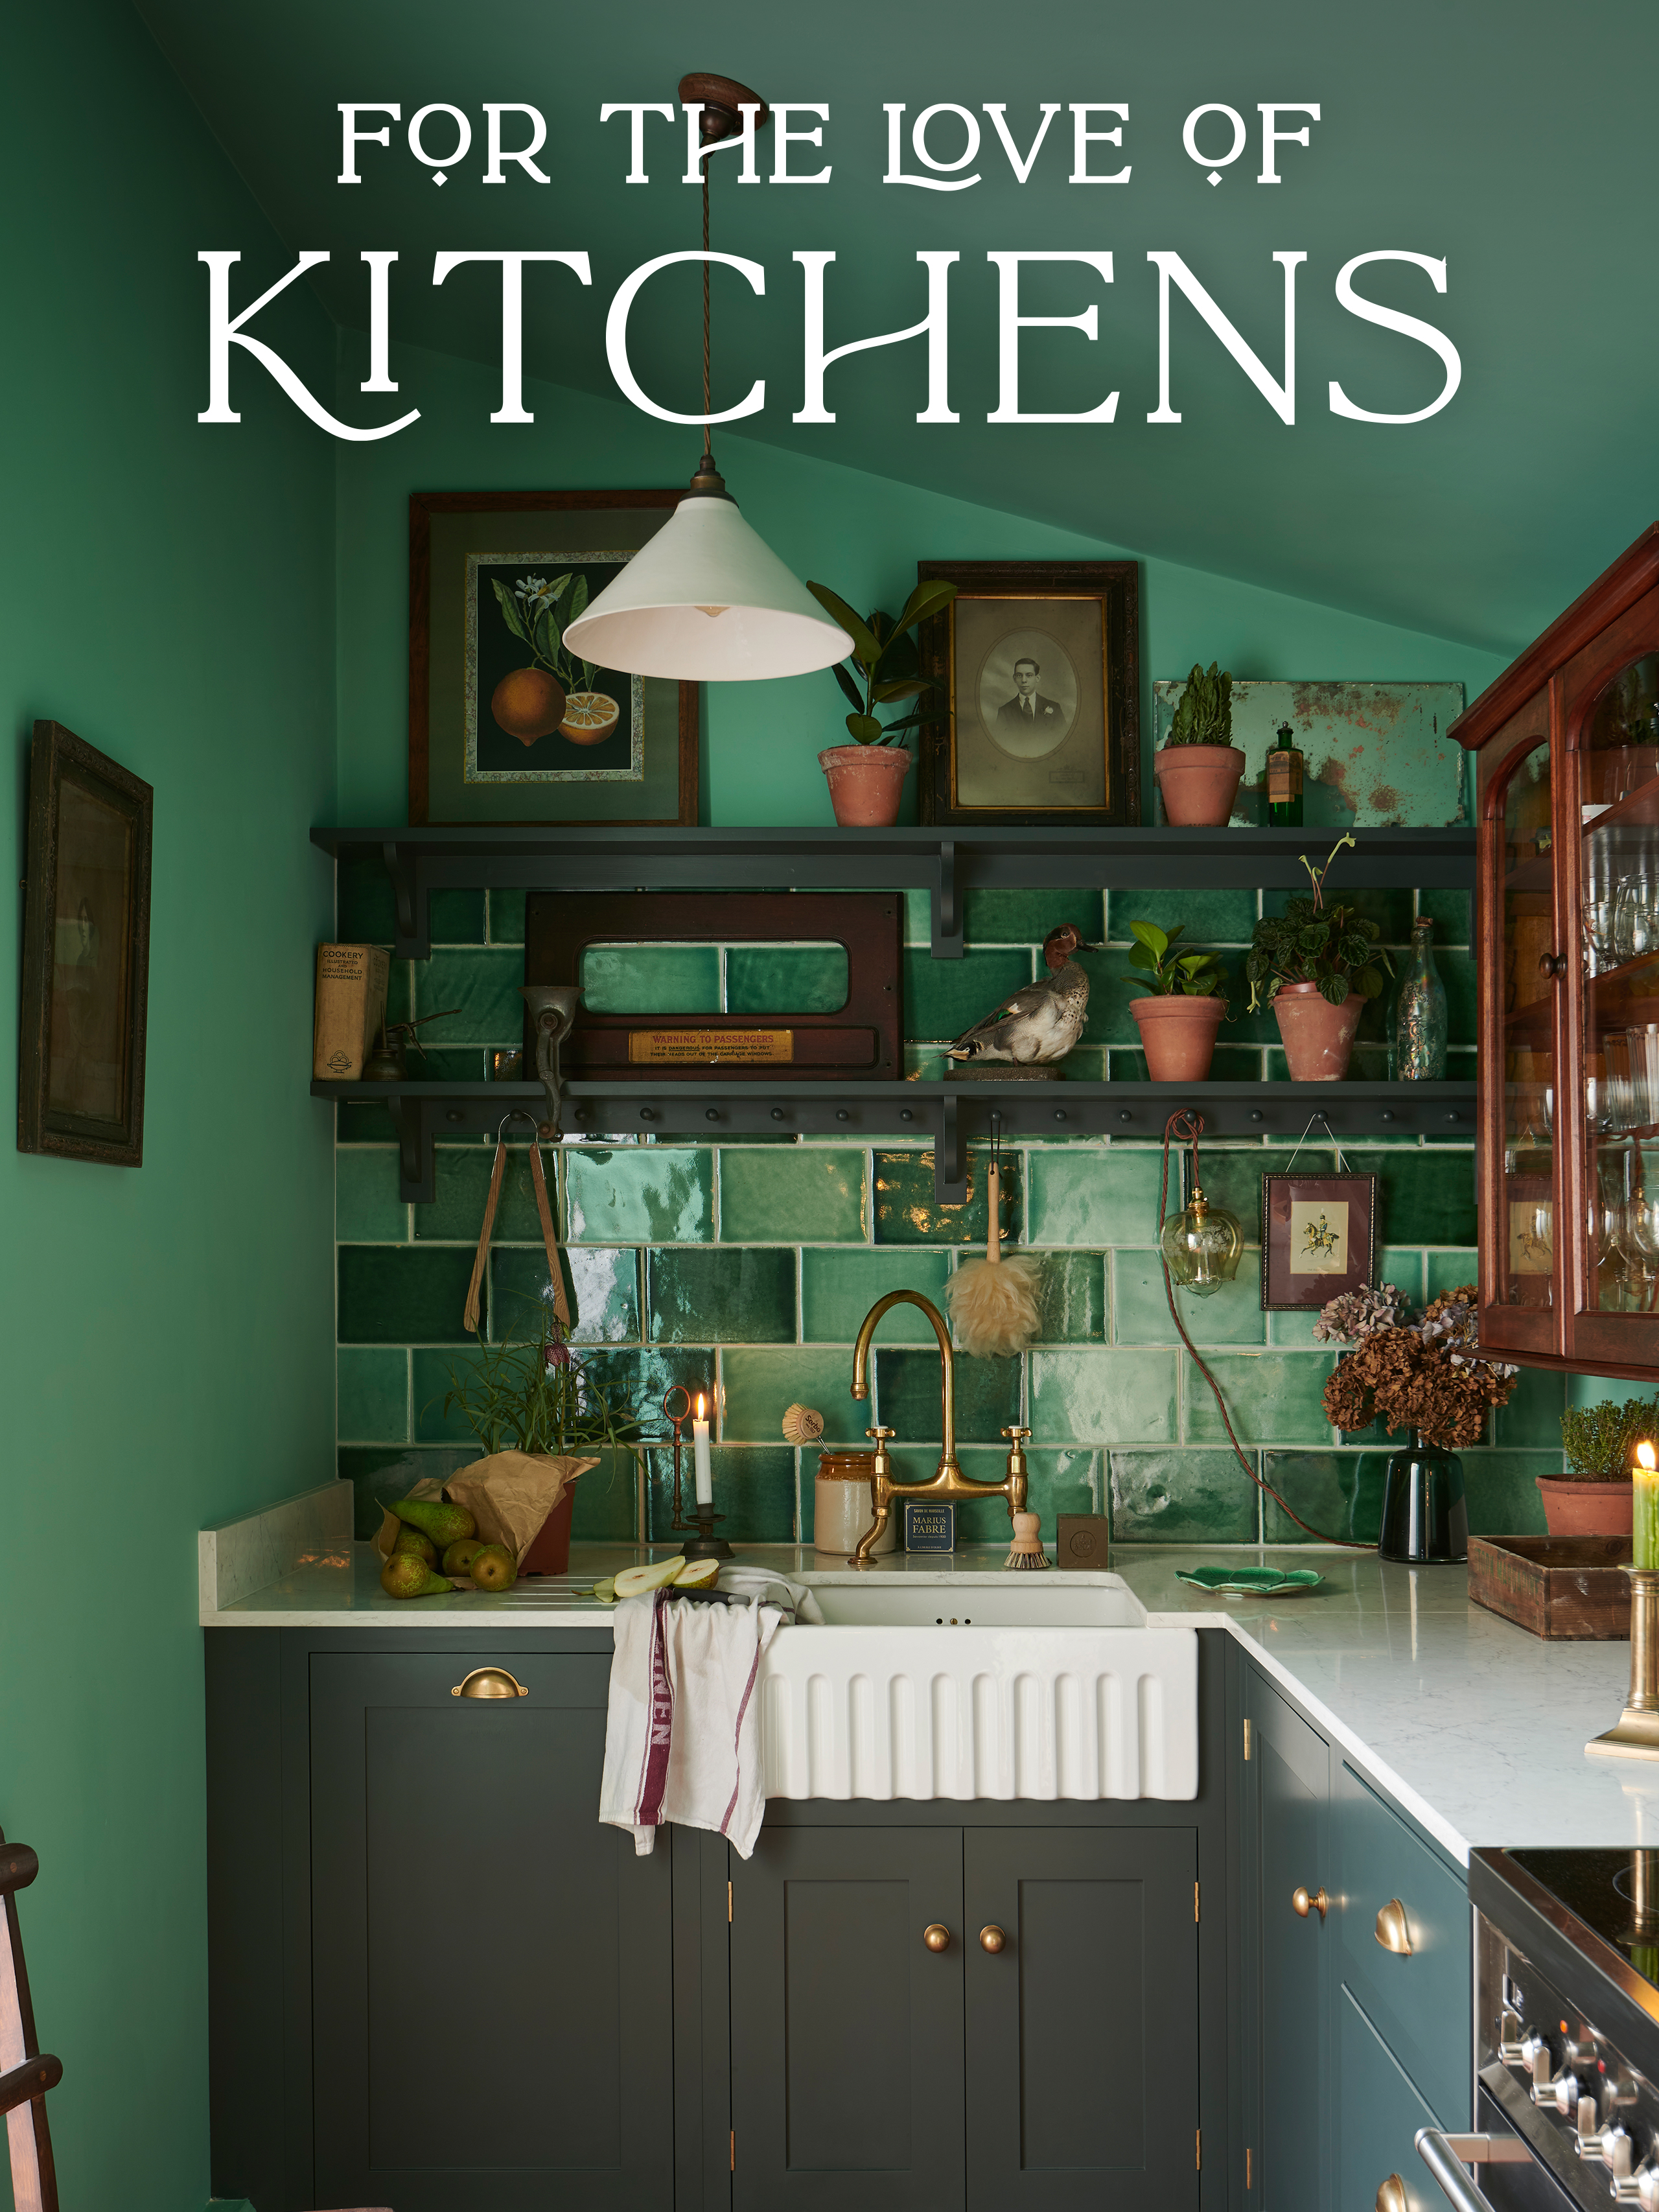 For The Love of Kitchens Season 1 Episode 4